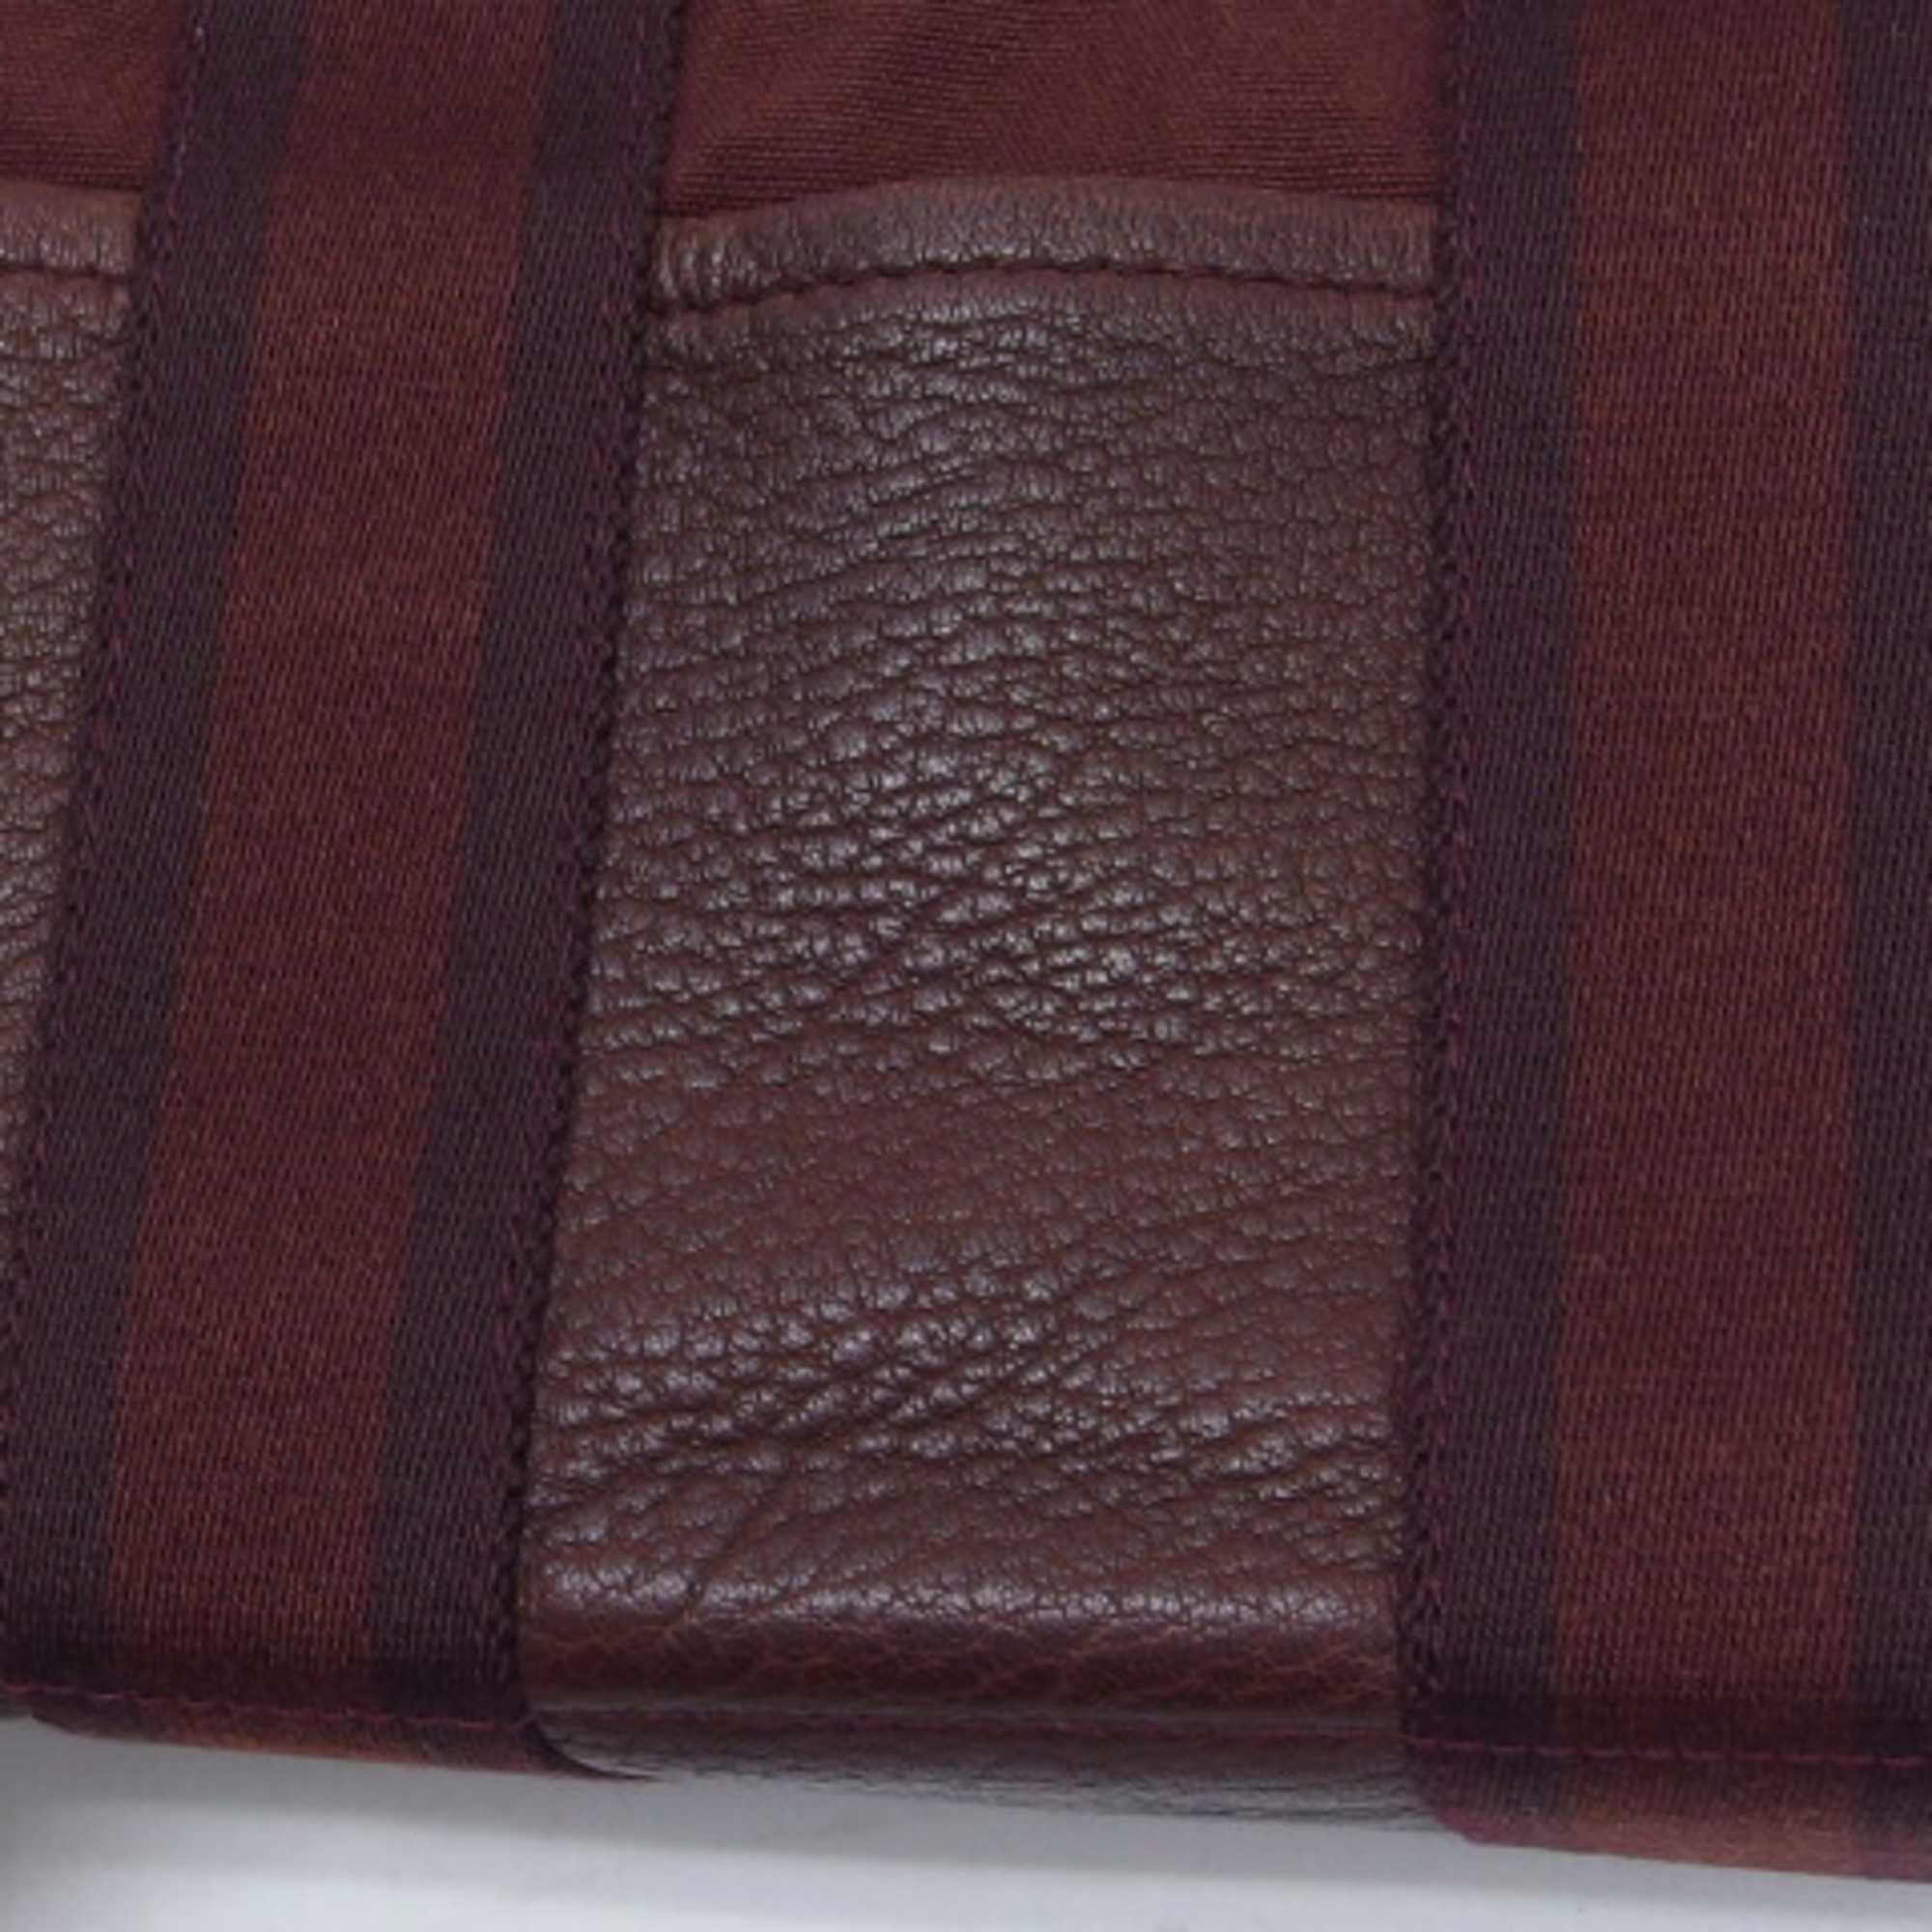 Hermes Four Toe PM Tote Bag Half Leather Bordeaux (Deep Red)